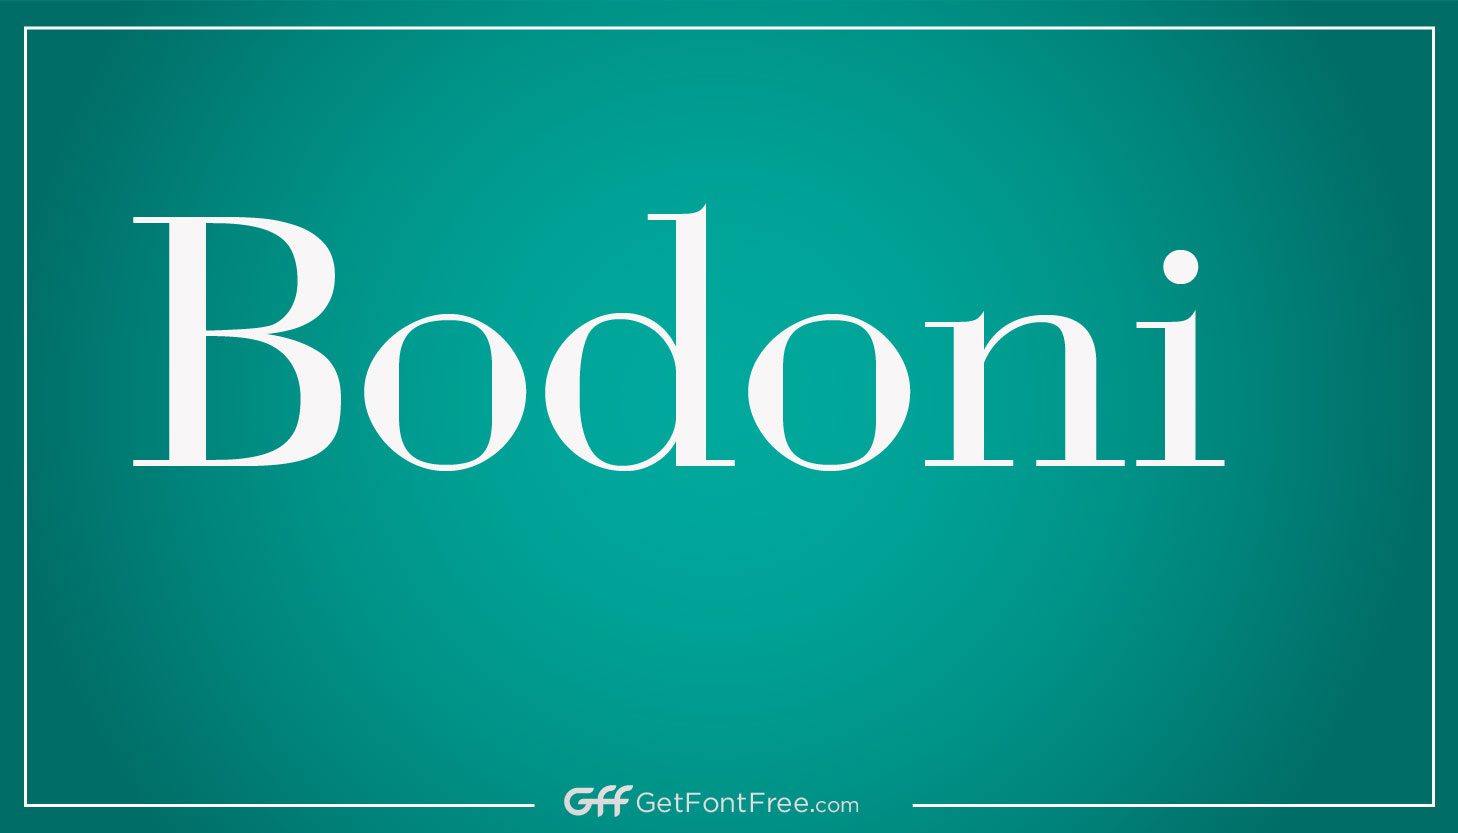 Bodoni Font is a serif typeface that was created by the Italian typographer and printer Giambattista Bodoni in the late 18th century. Bodoni was designed as a display typeface, intended for use in titles and headlines rather than in body text.